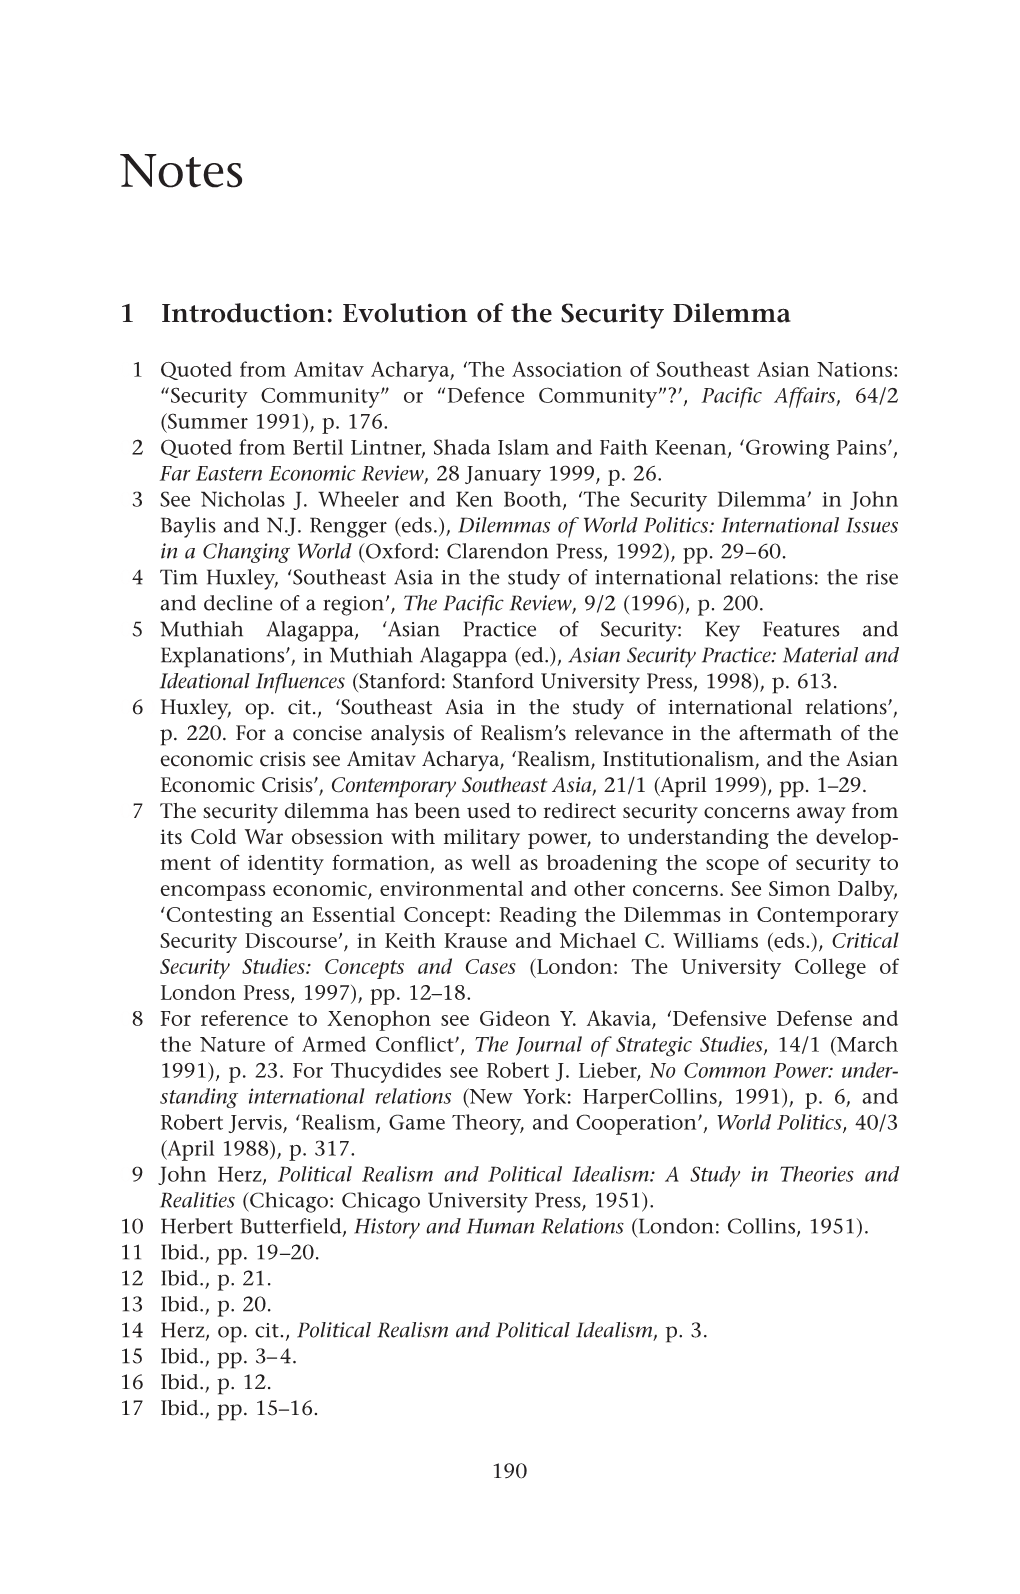 1 Introduction: Evolution of the Security Dilemma